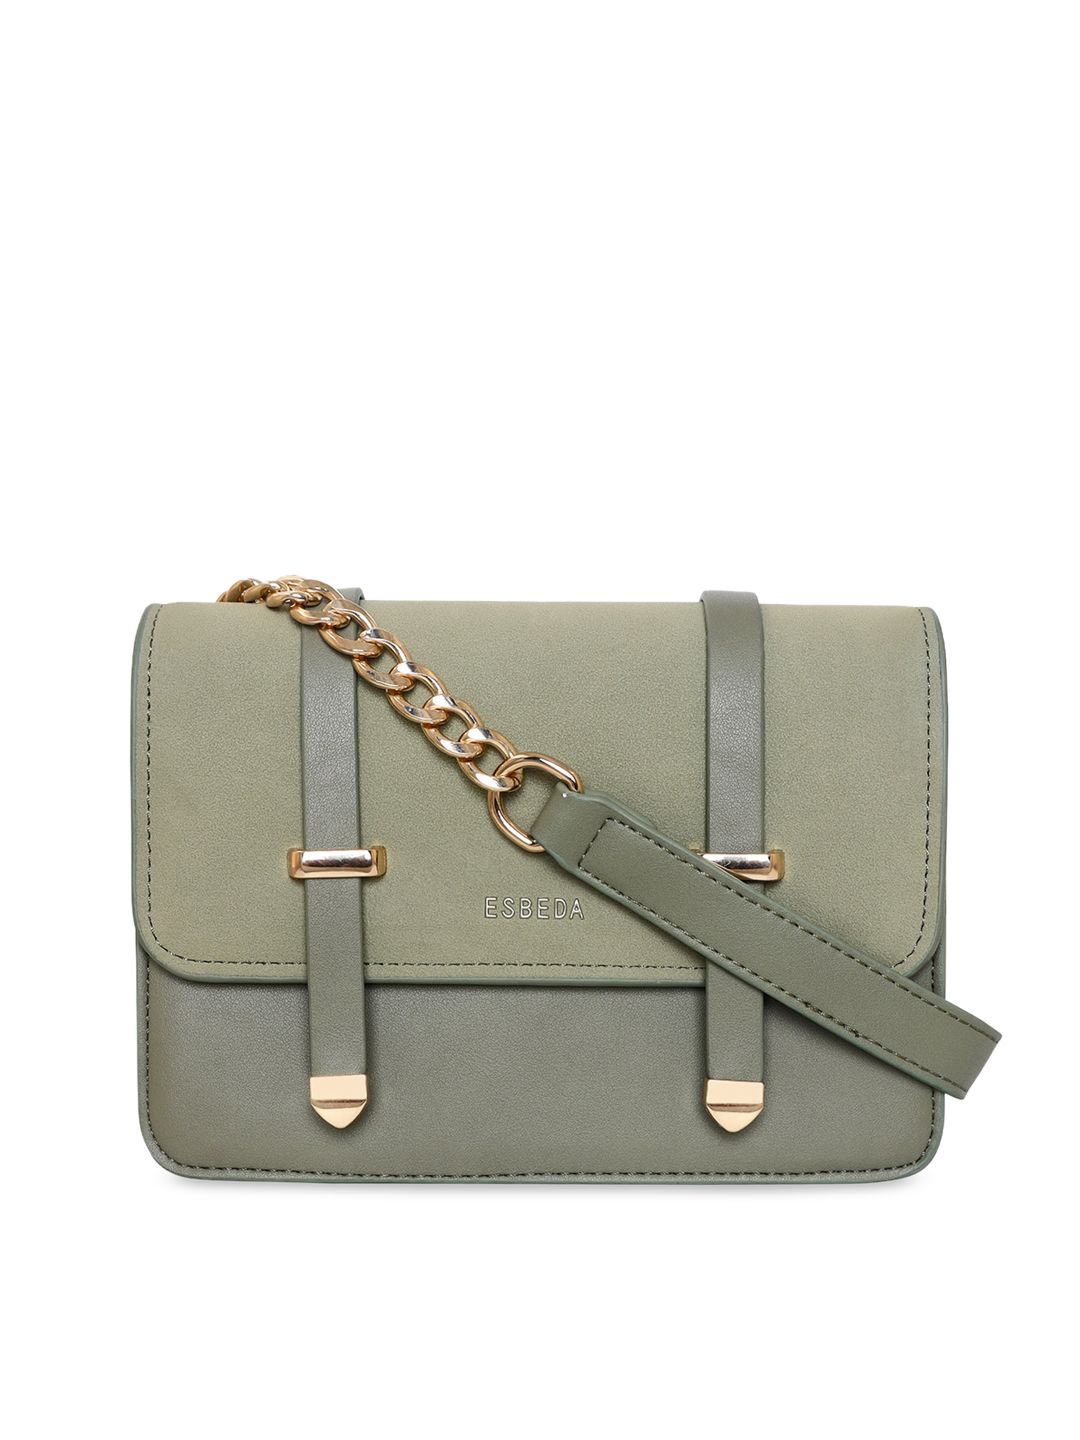 ESBEDA Olive Green Colourblocked PU Structured Sling Bag Price in India